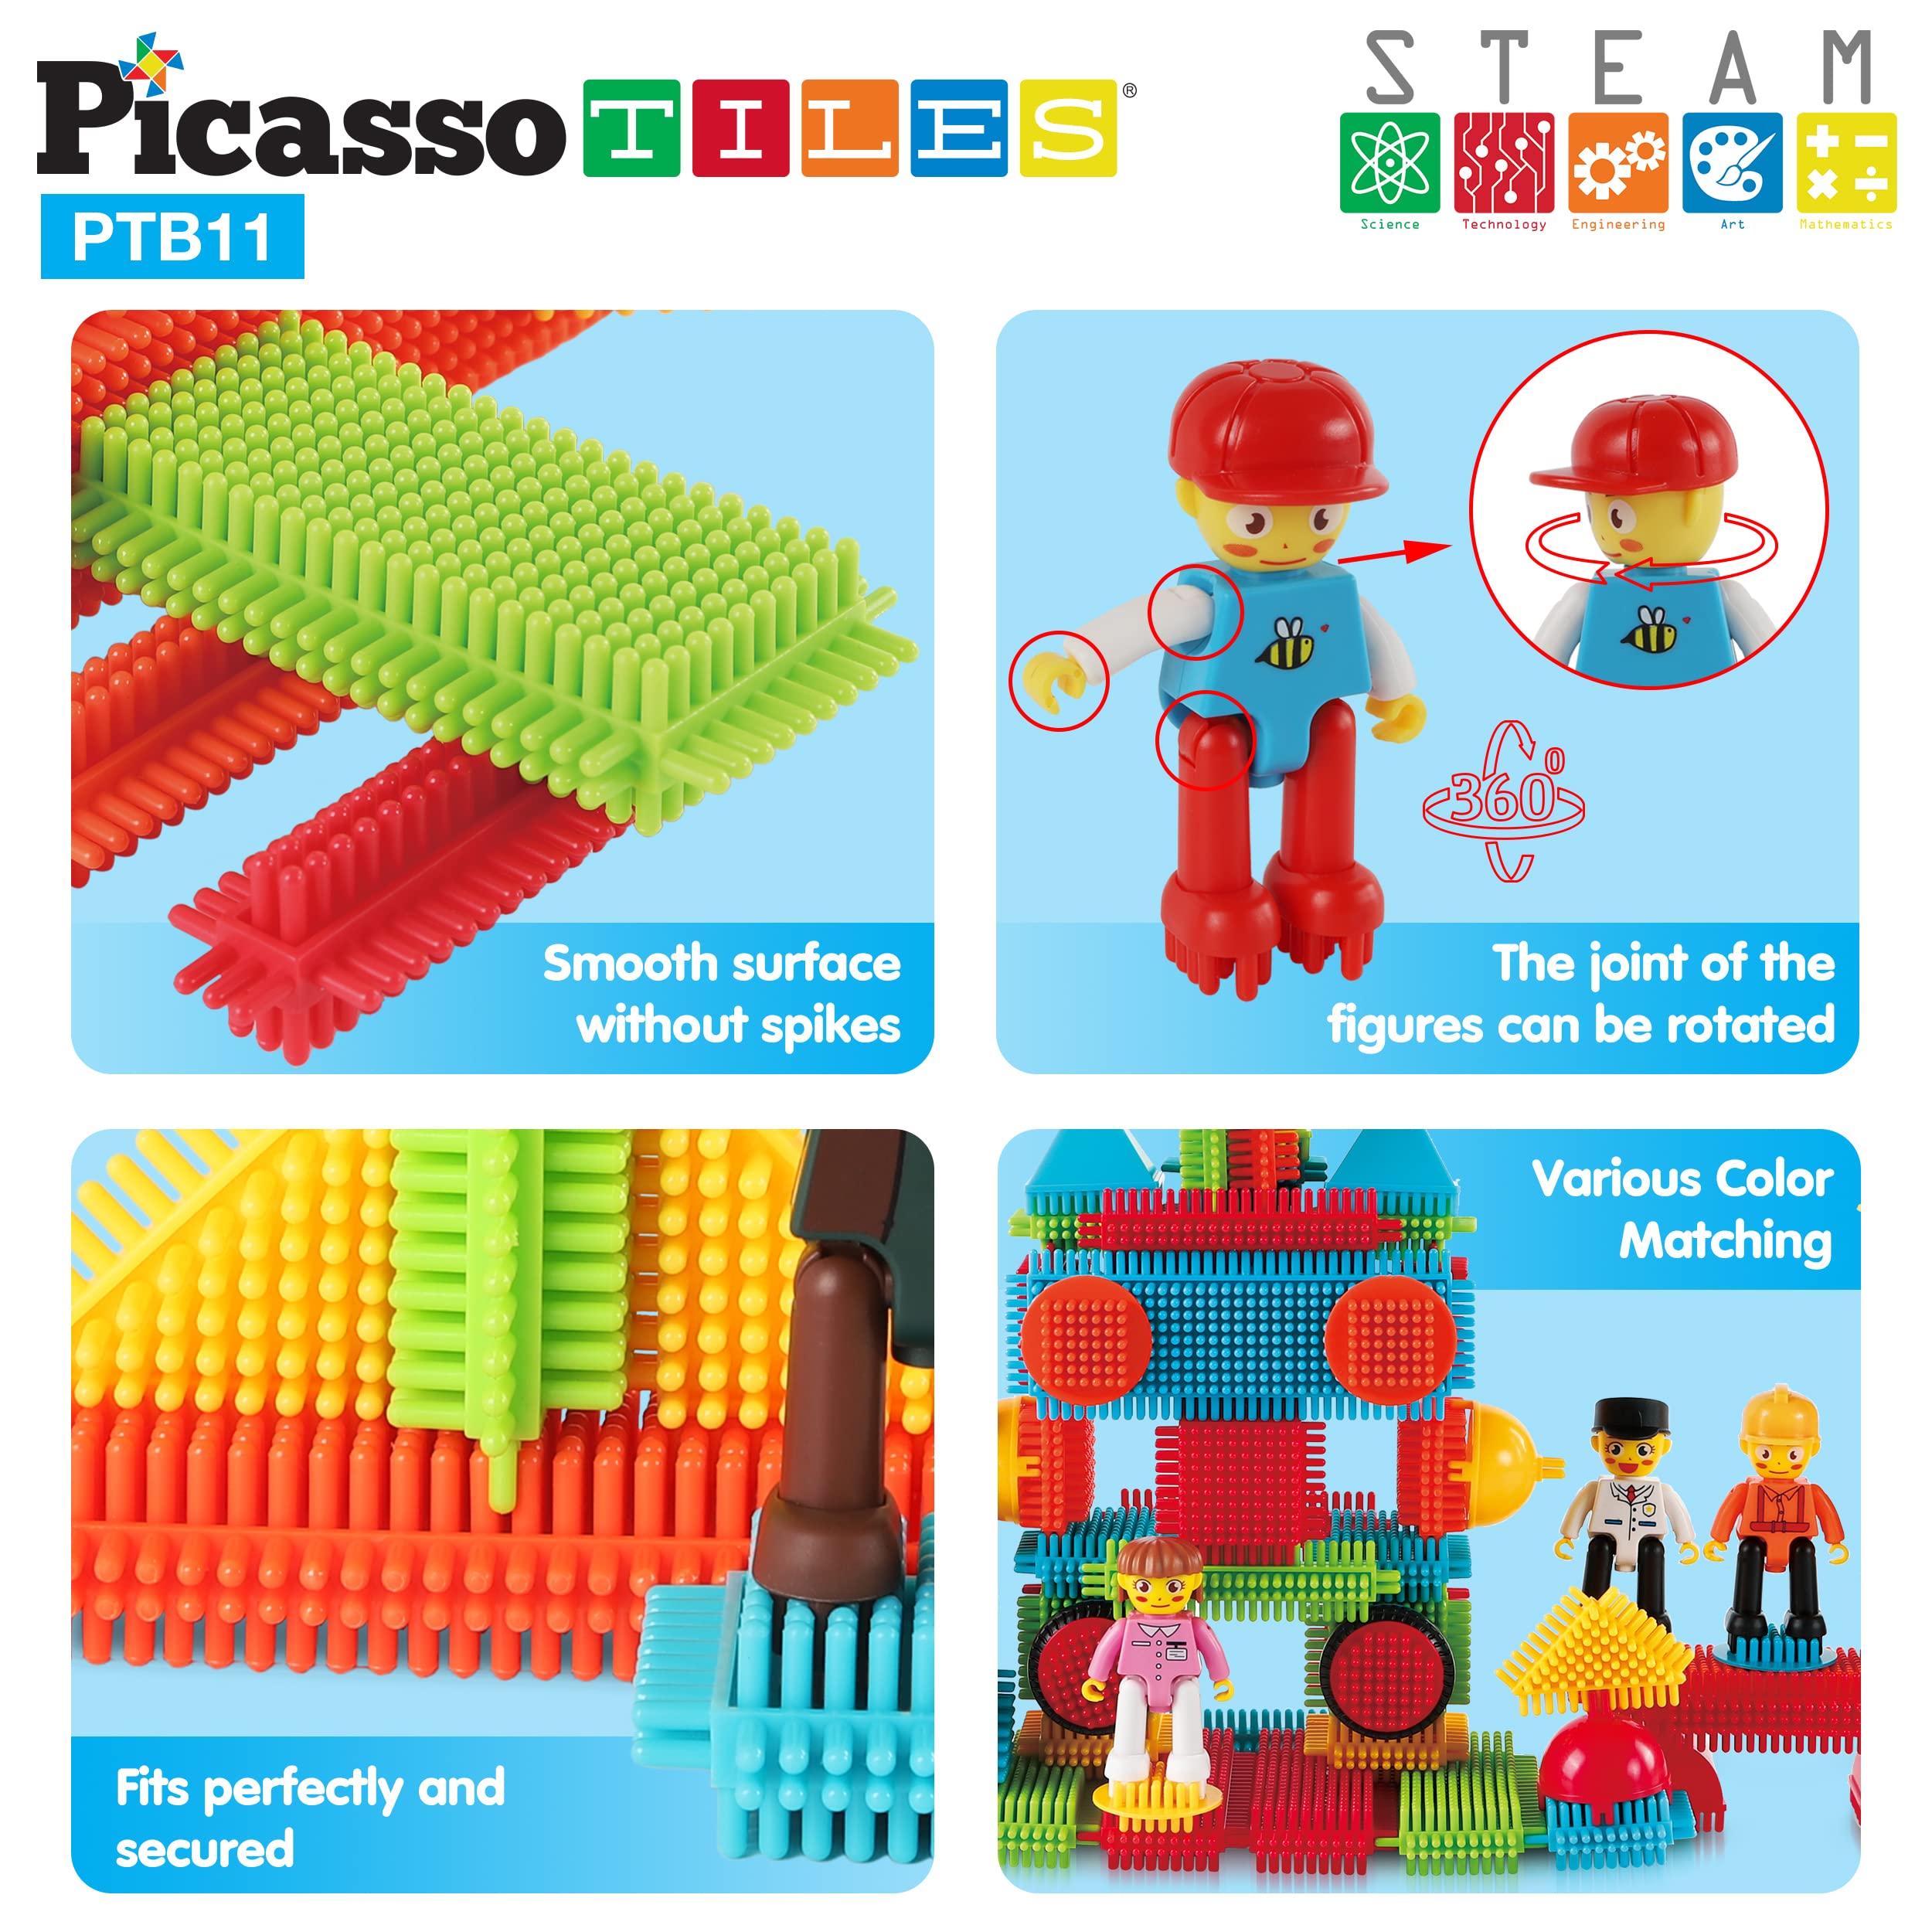 PicassoTiles 120PC Bristle Shape 3D Building Blocks + 4 Family People Action Figures Expansion Set: STEAM Learning & Educational Playset for Preschool and Kindergarten Kids, Pretend Play Toy for Kids